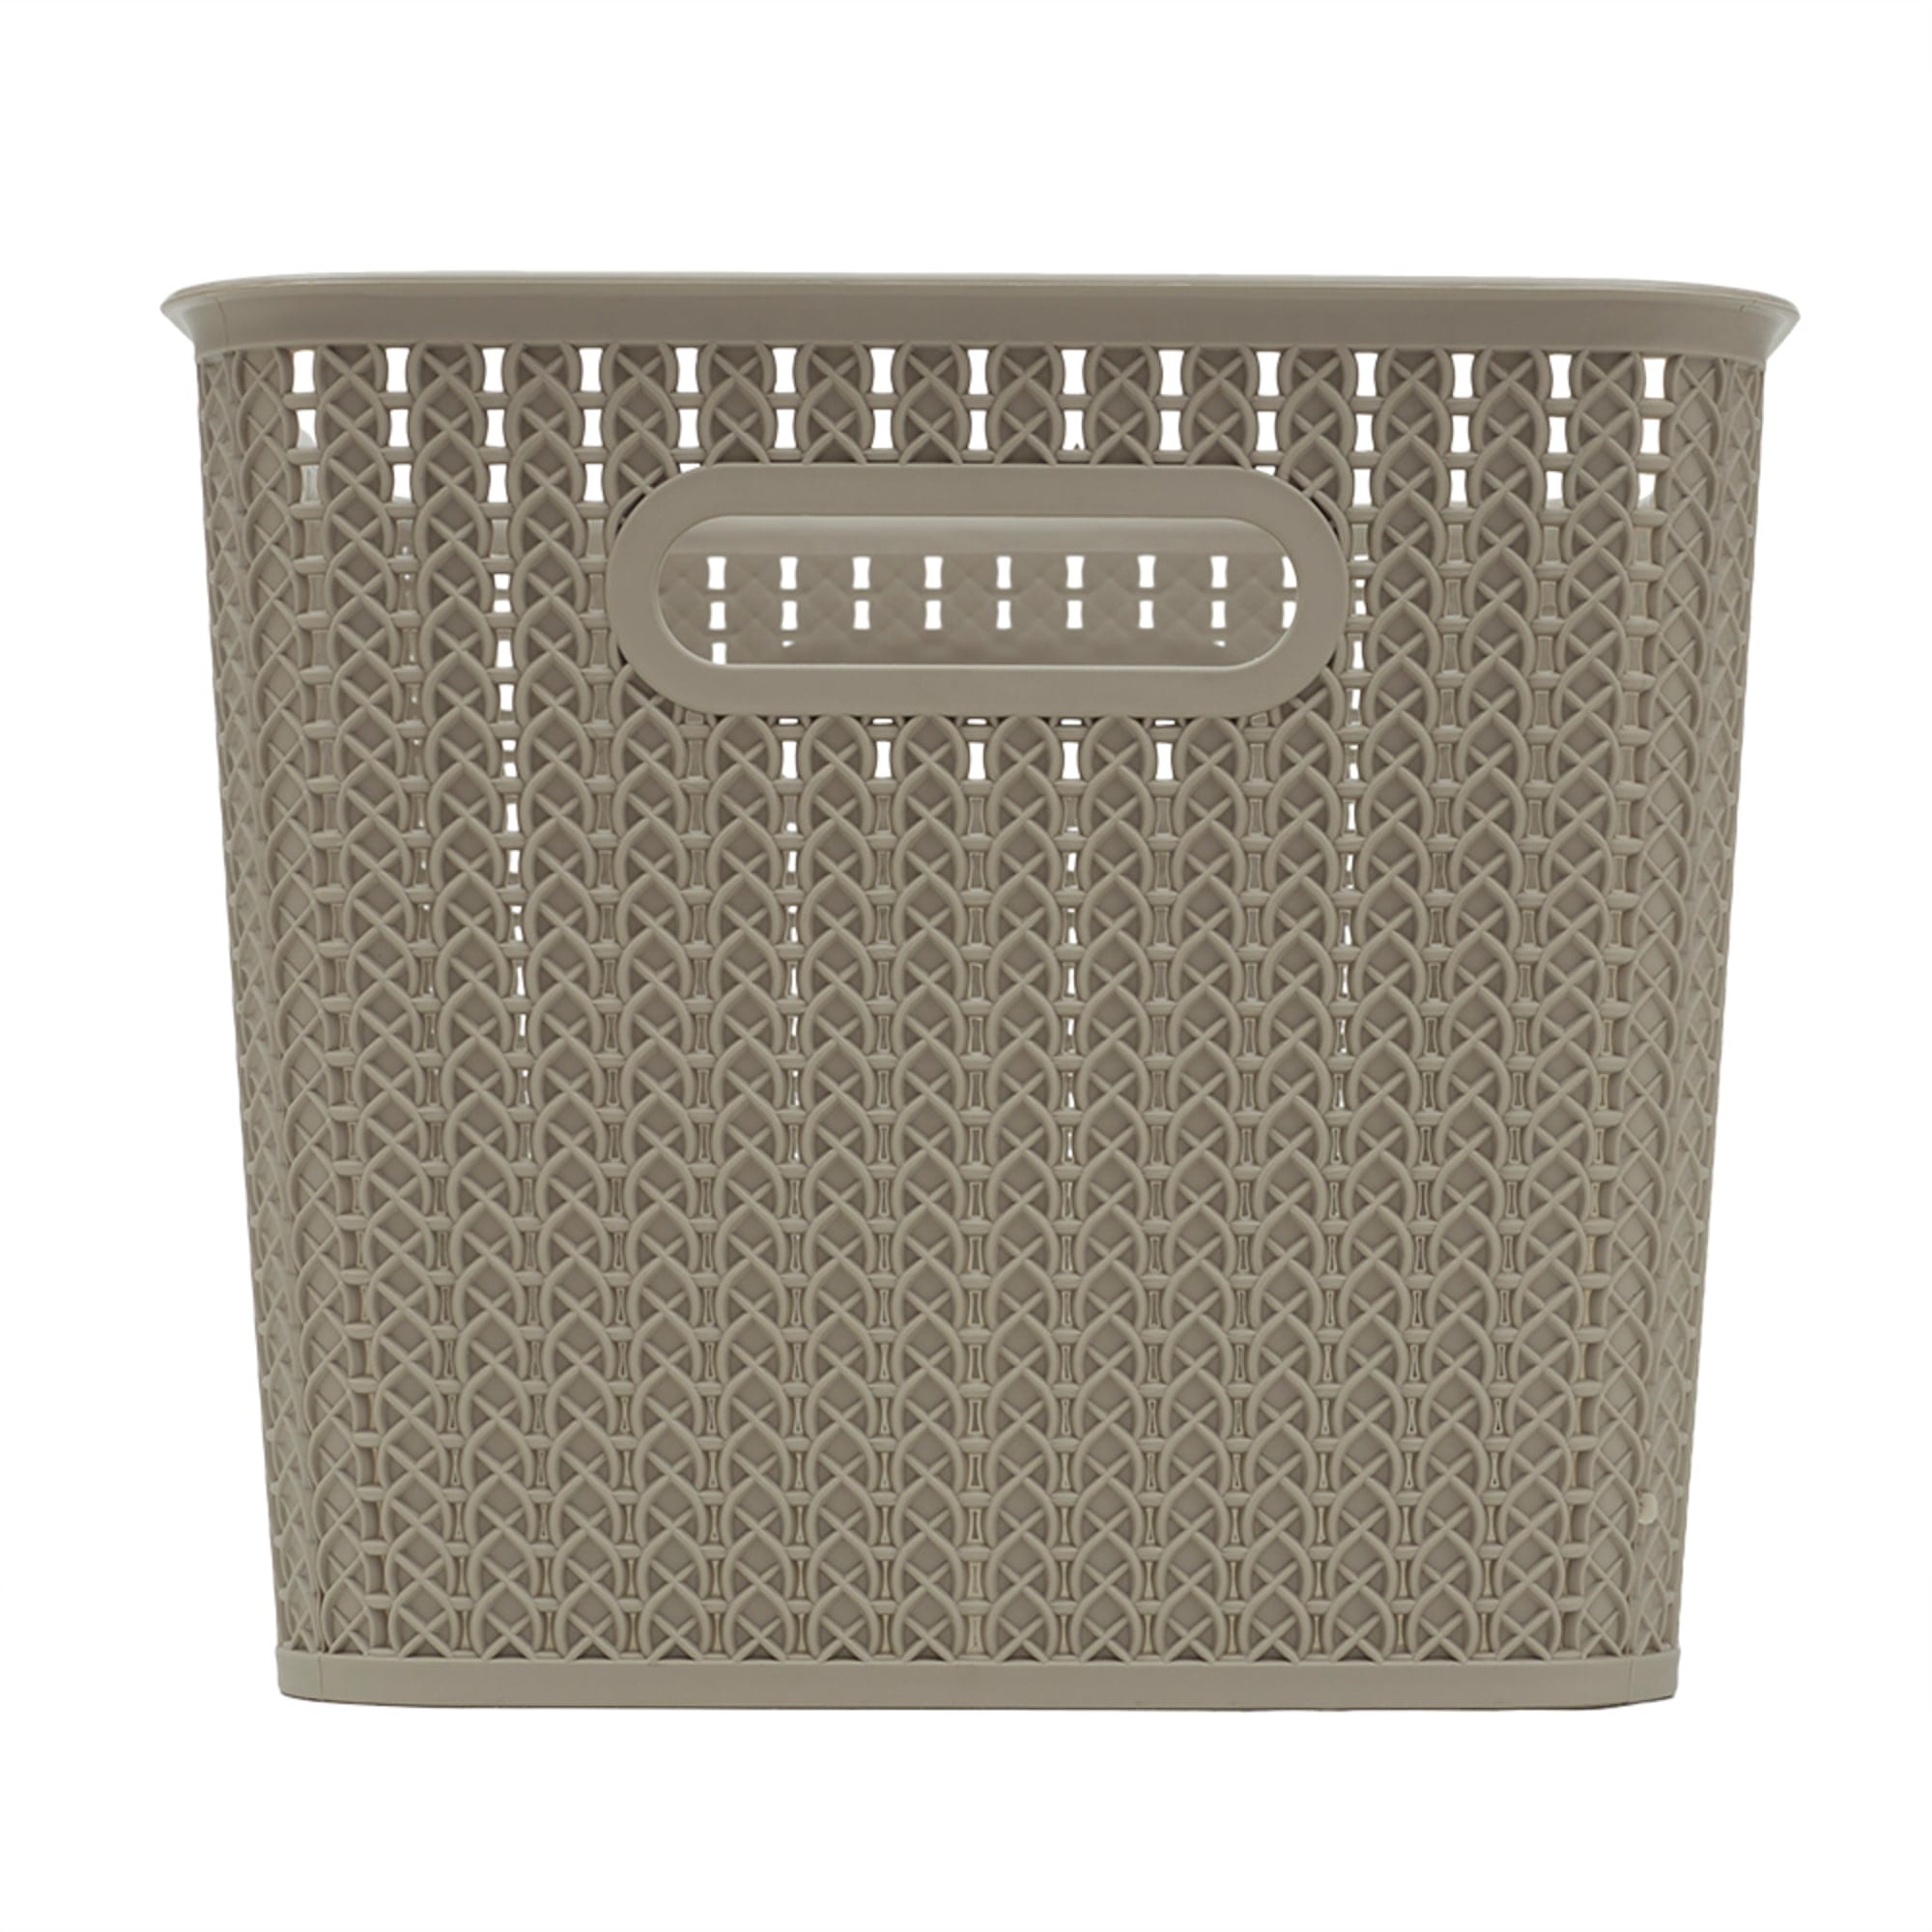 Home Basics 20 Liter Plastic Basket With Handles, Grey $6 EACH, CASE PACK OF 4